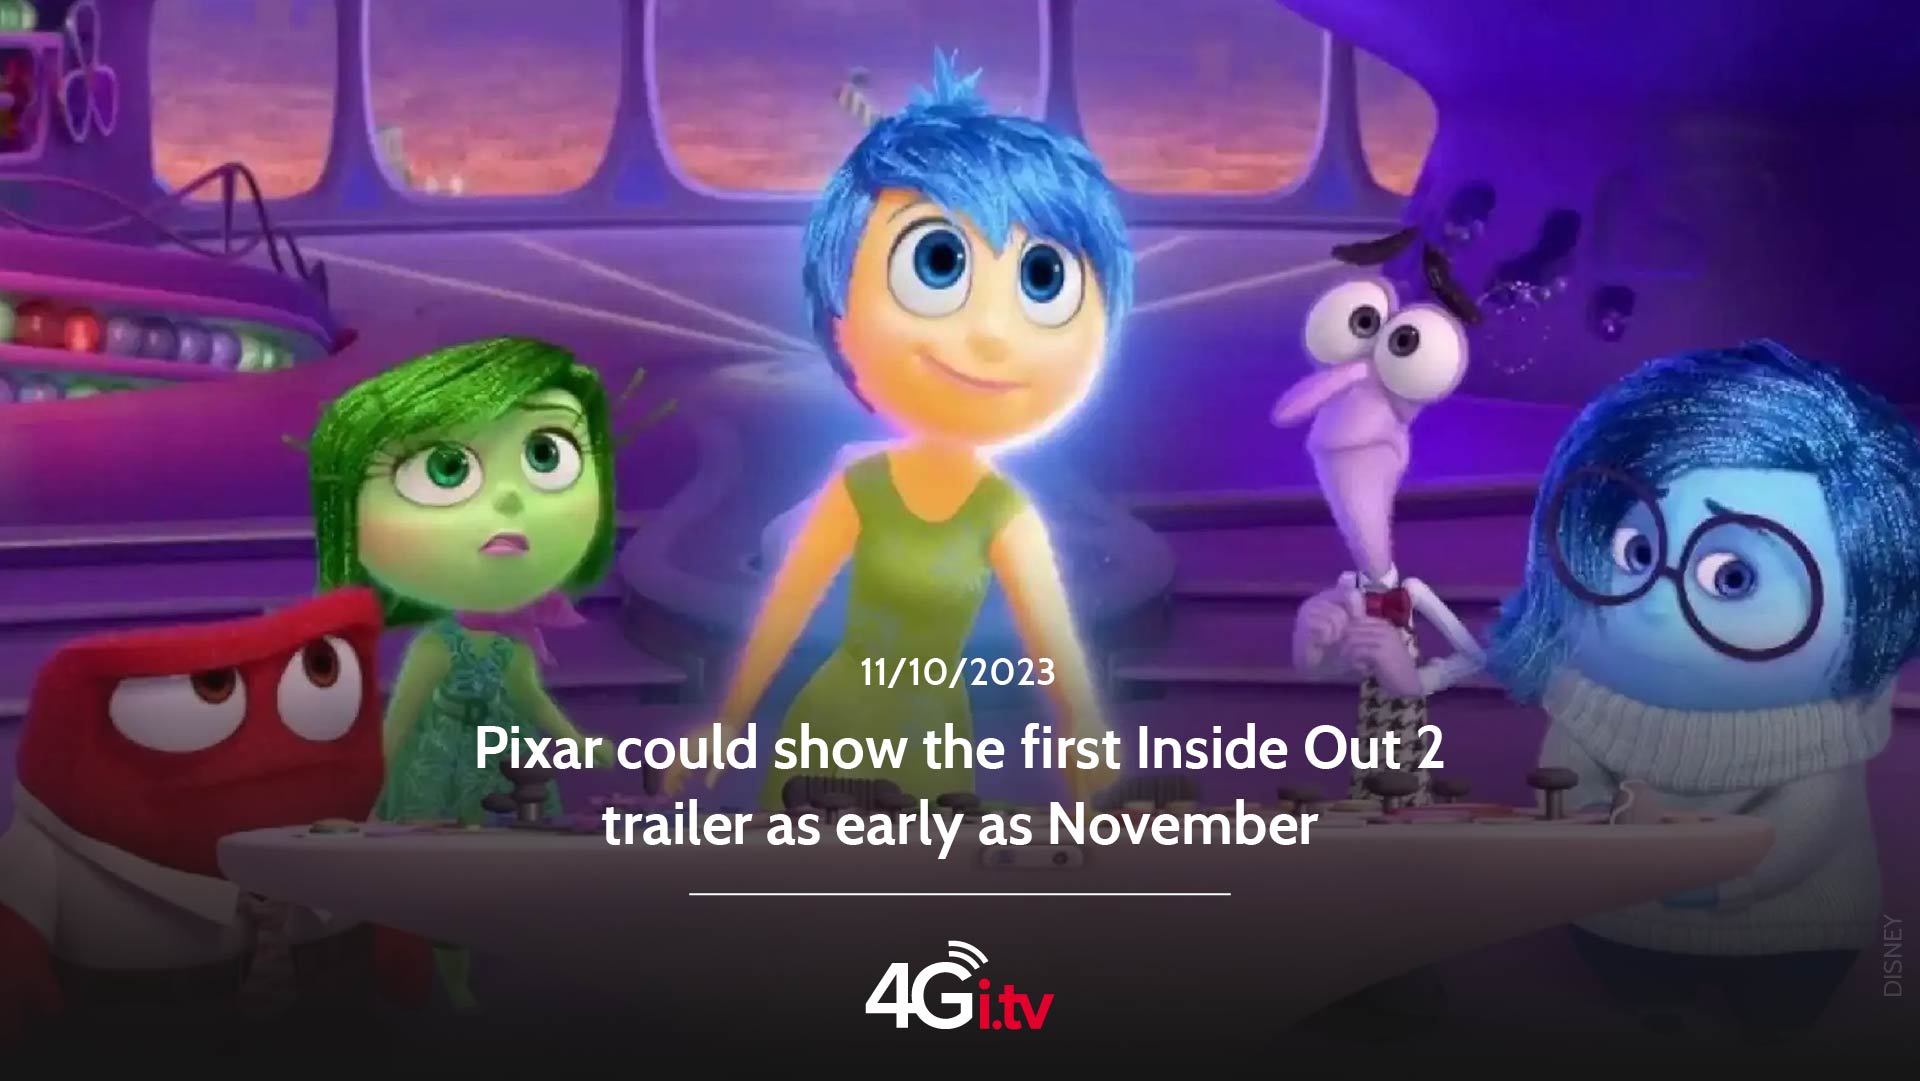 Lesen Sie mehr über den Artikel Pixar could show the first Inside Out 2 trailer as early as November